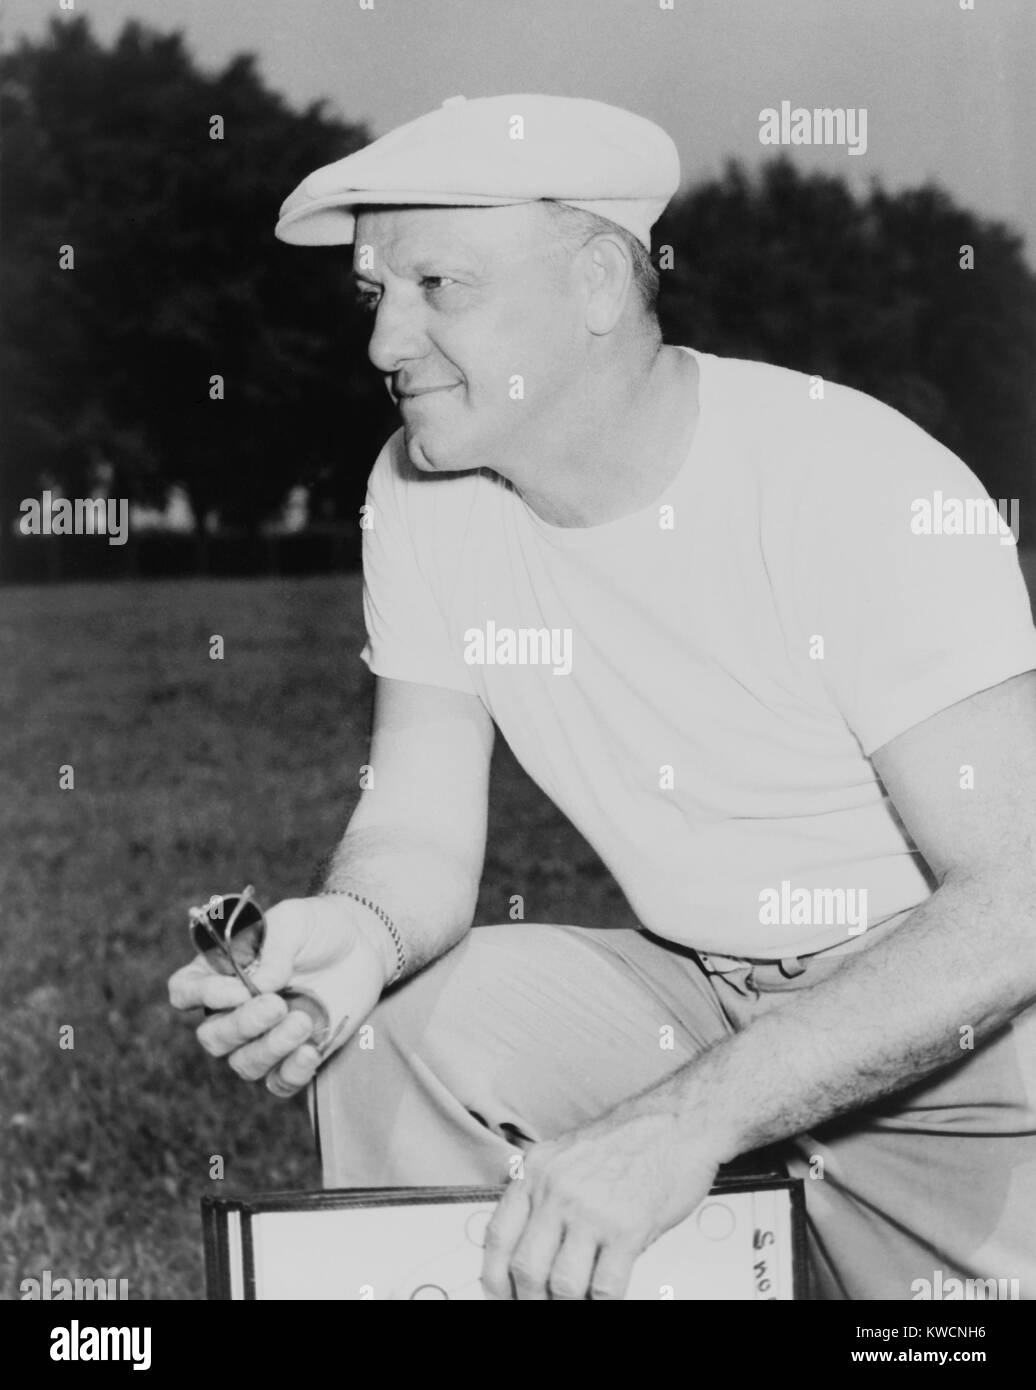 George Halas, founder and coach of the Chicago Bears in 1949. He was one of the original co-founders of the National Football League (NFL) in 1922. - (BSLOC 2014 17 170) Stock Photo